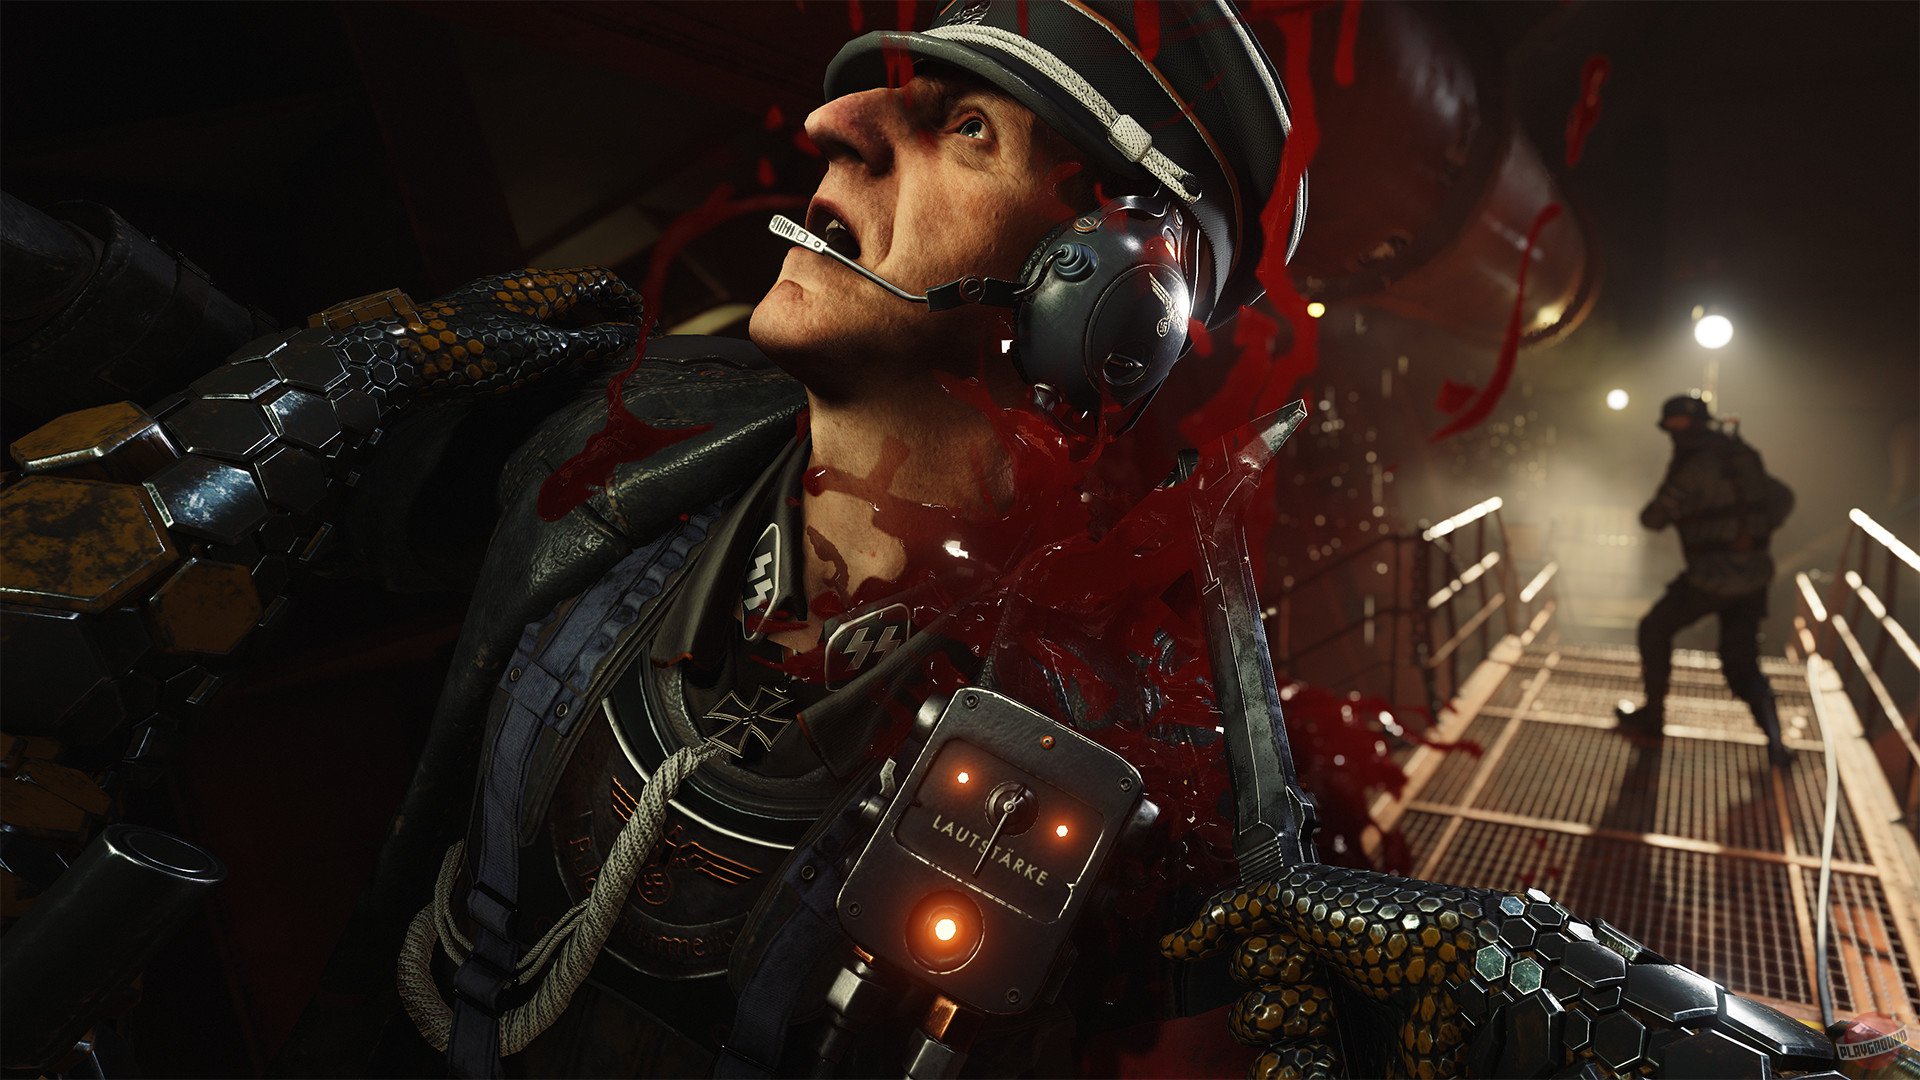 Wolfenstein II: The New Colossus [Update 6] (2017/PC/Русский), RePack by xatab